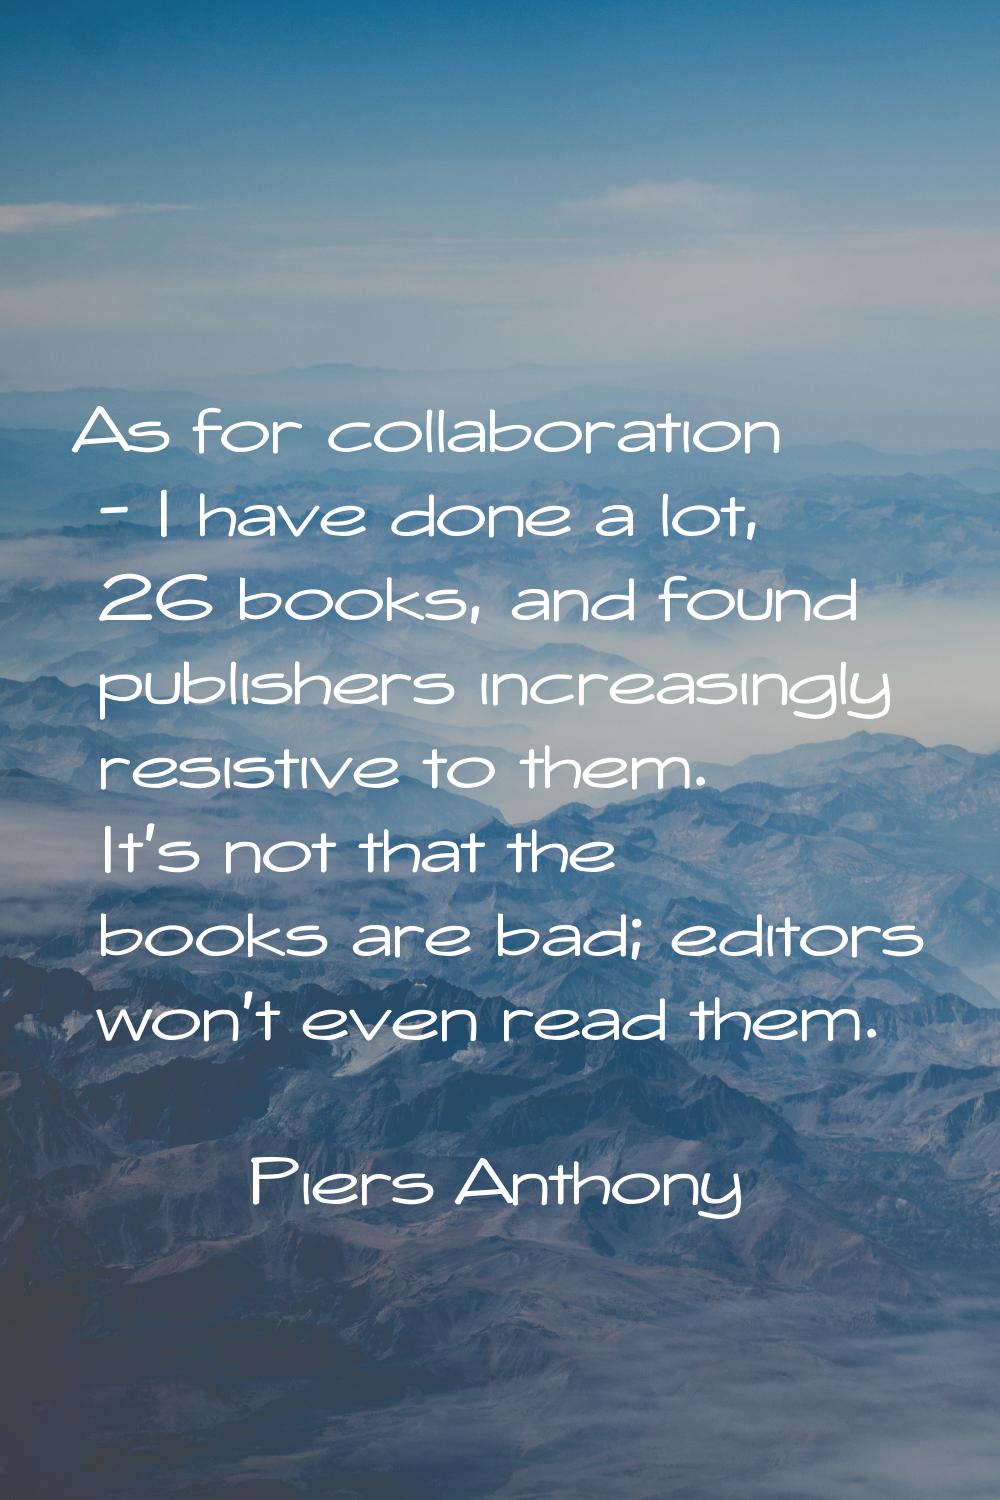 As for collaboration - I have done a lot, 26 books, and found publishers increasingly resistive to 